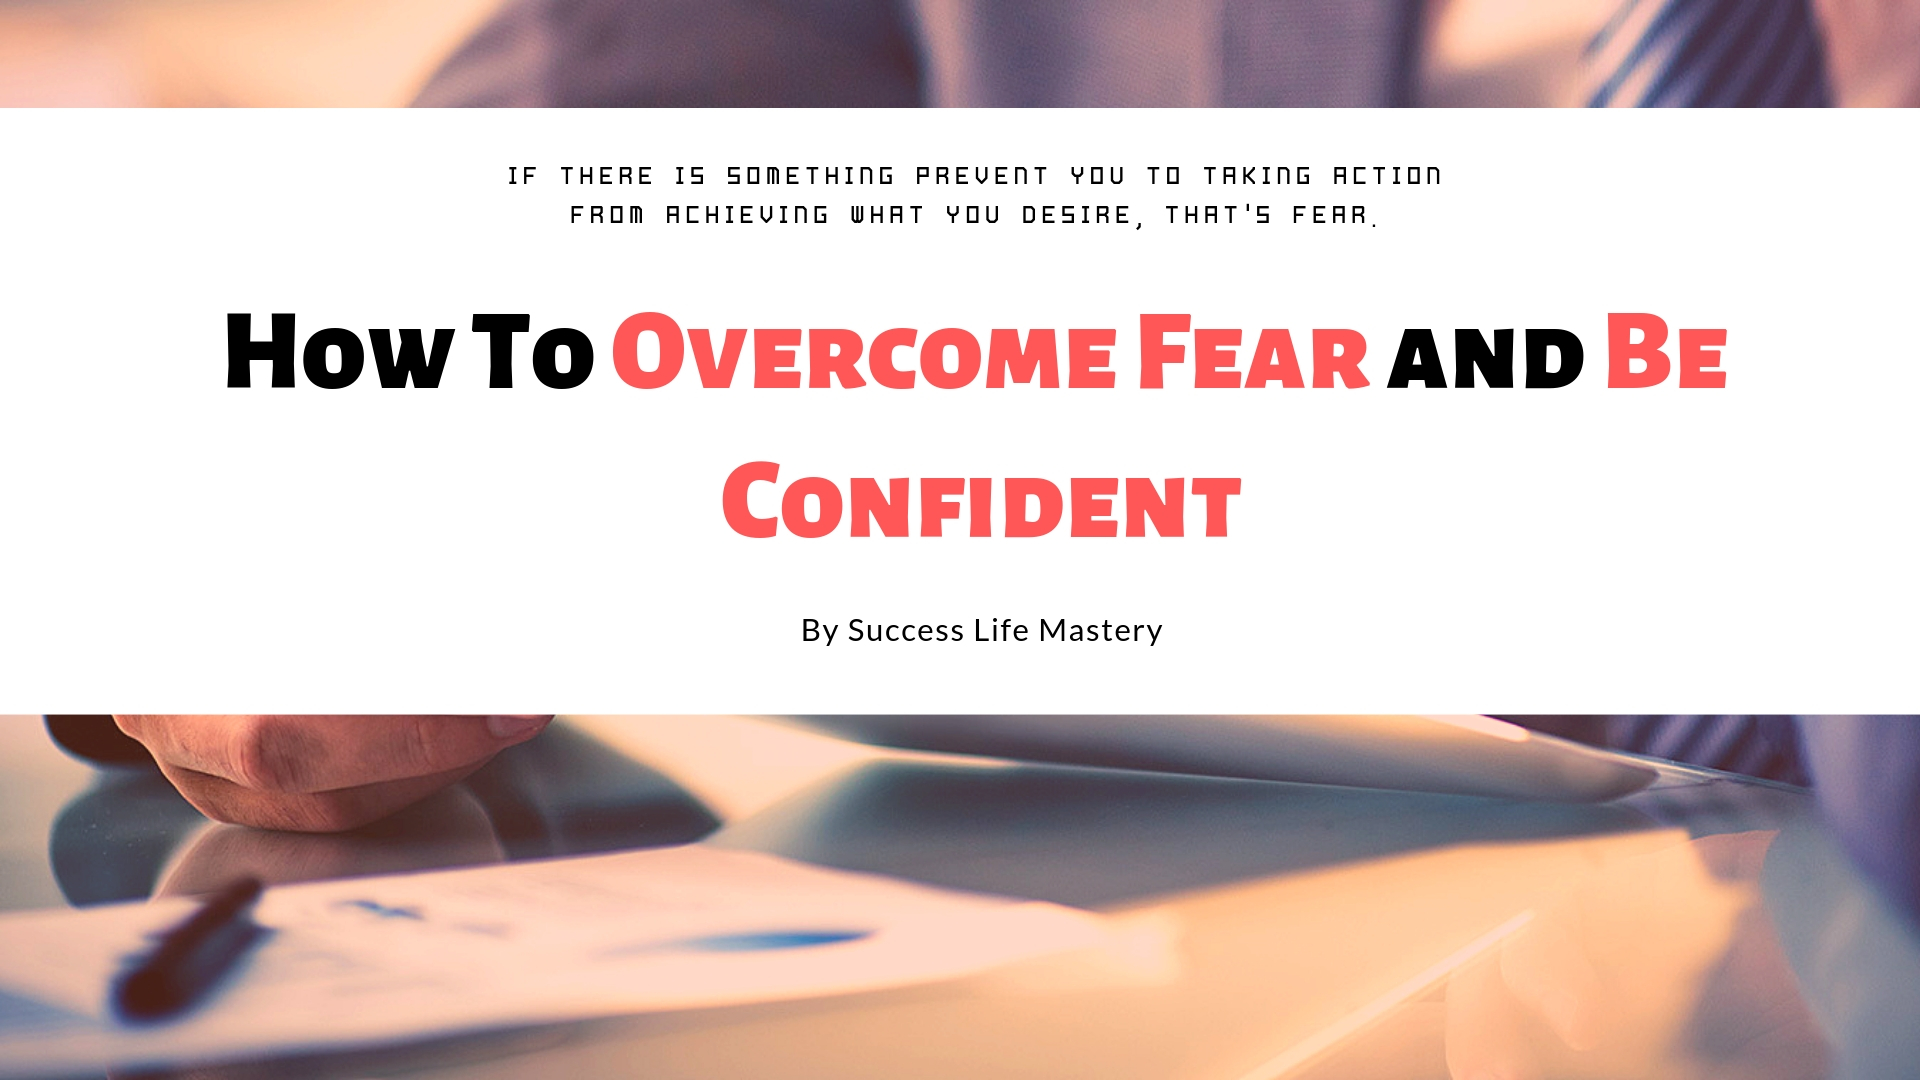 How To Overcome Fear and Be Confident